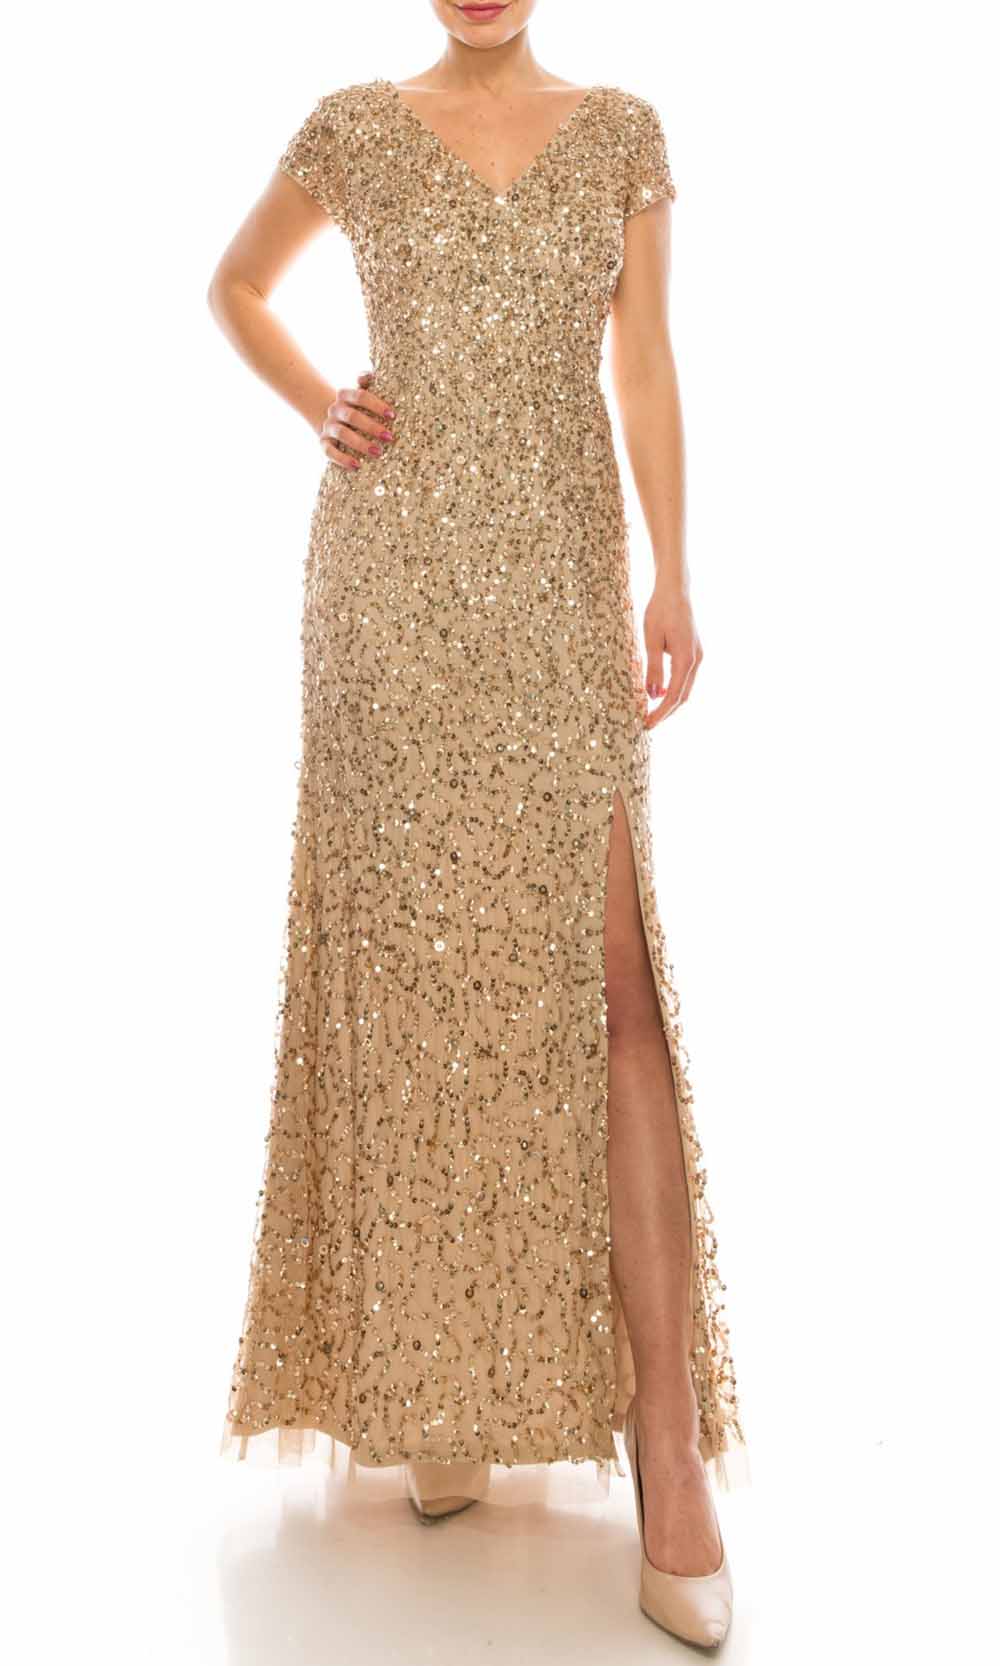 Adrianna Papell - AP1E206322 Sequined V-Neck Dress In Gold